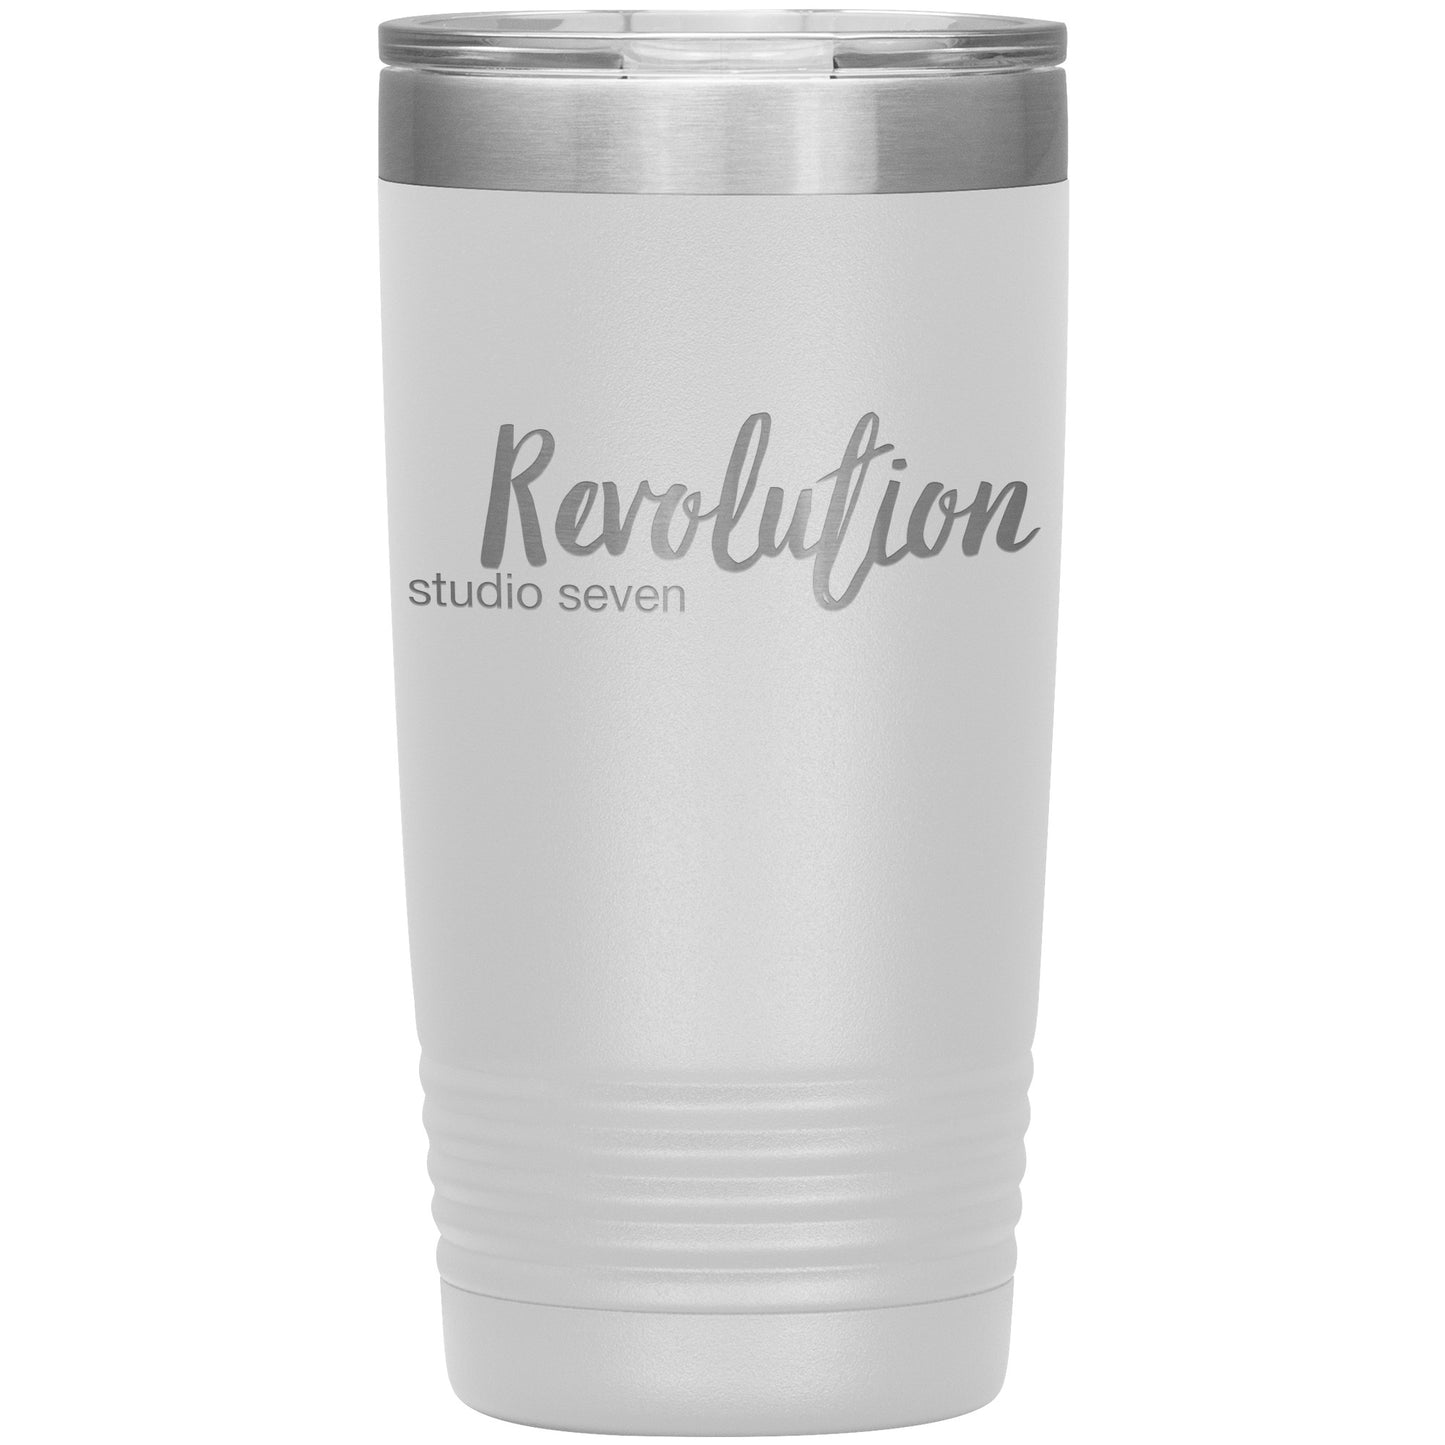 Revolution Insulated Tumblers